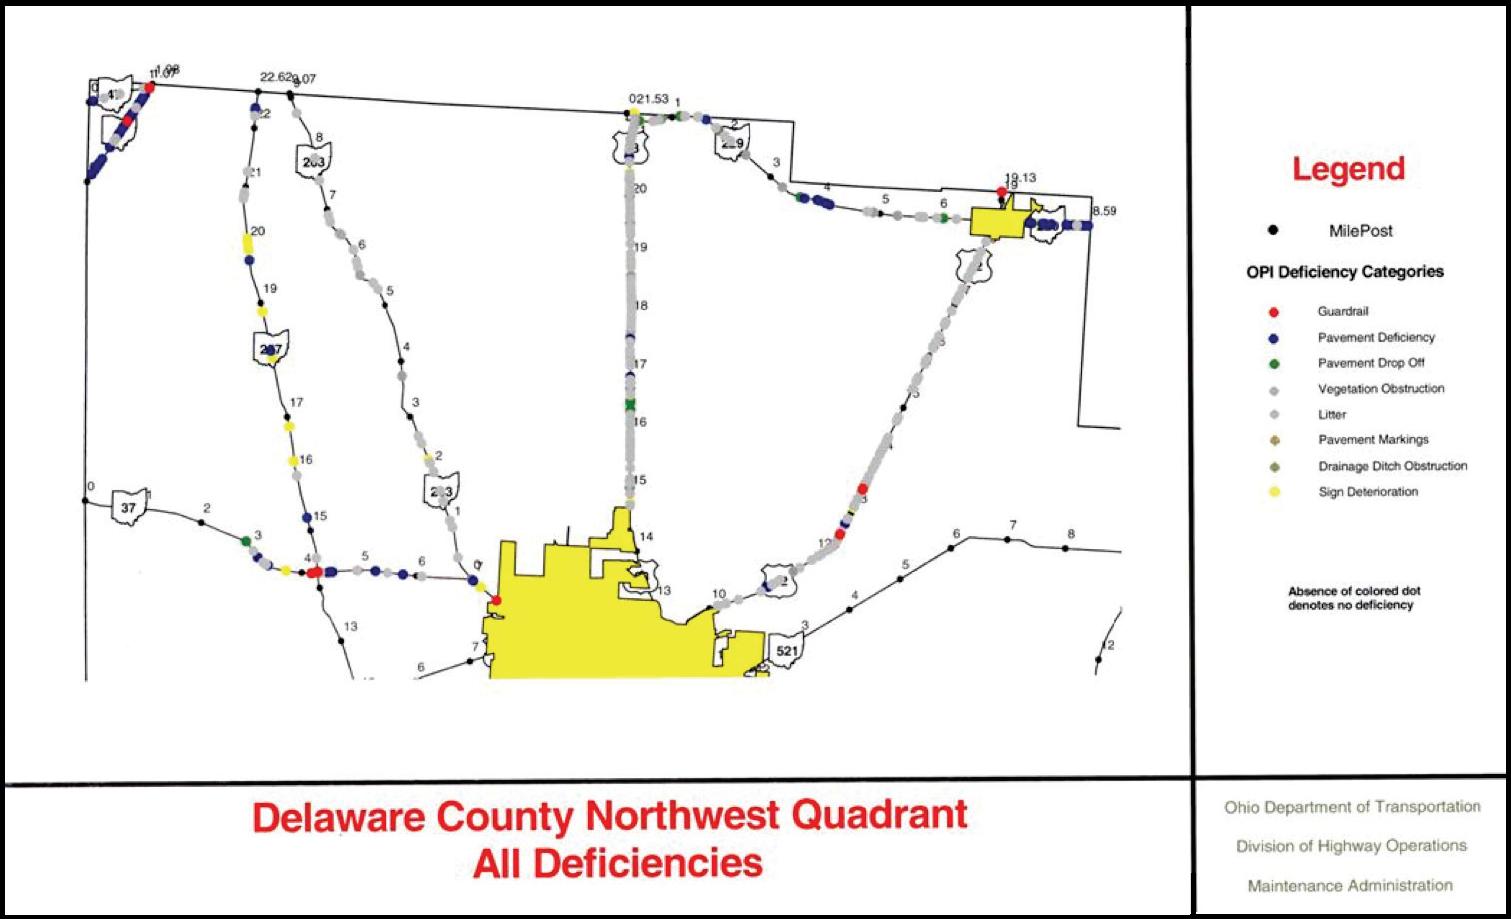 Figure 57 is a map of one quadrant of Deleware County Ohio. It has color-coded dots along the highways with each dot indicating the location and type of deficiency. The key indicates that deficiencies include guardrail, pavement deficiencies, pavement drop offs, vegetation obstruction, litter, pavement markings, drainage obstructions or sign deterioration. 